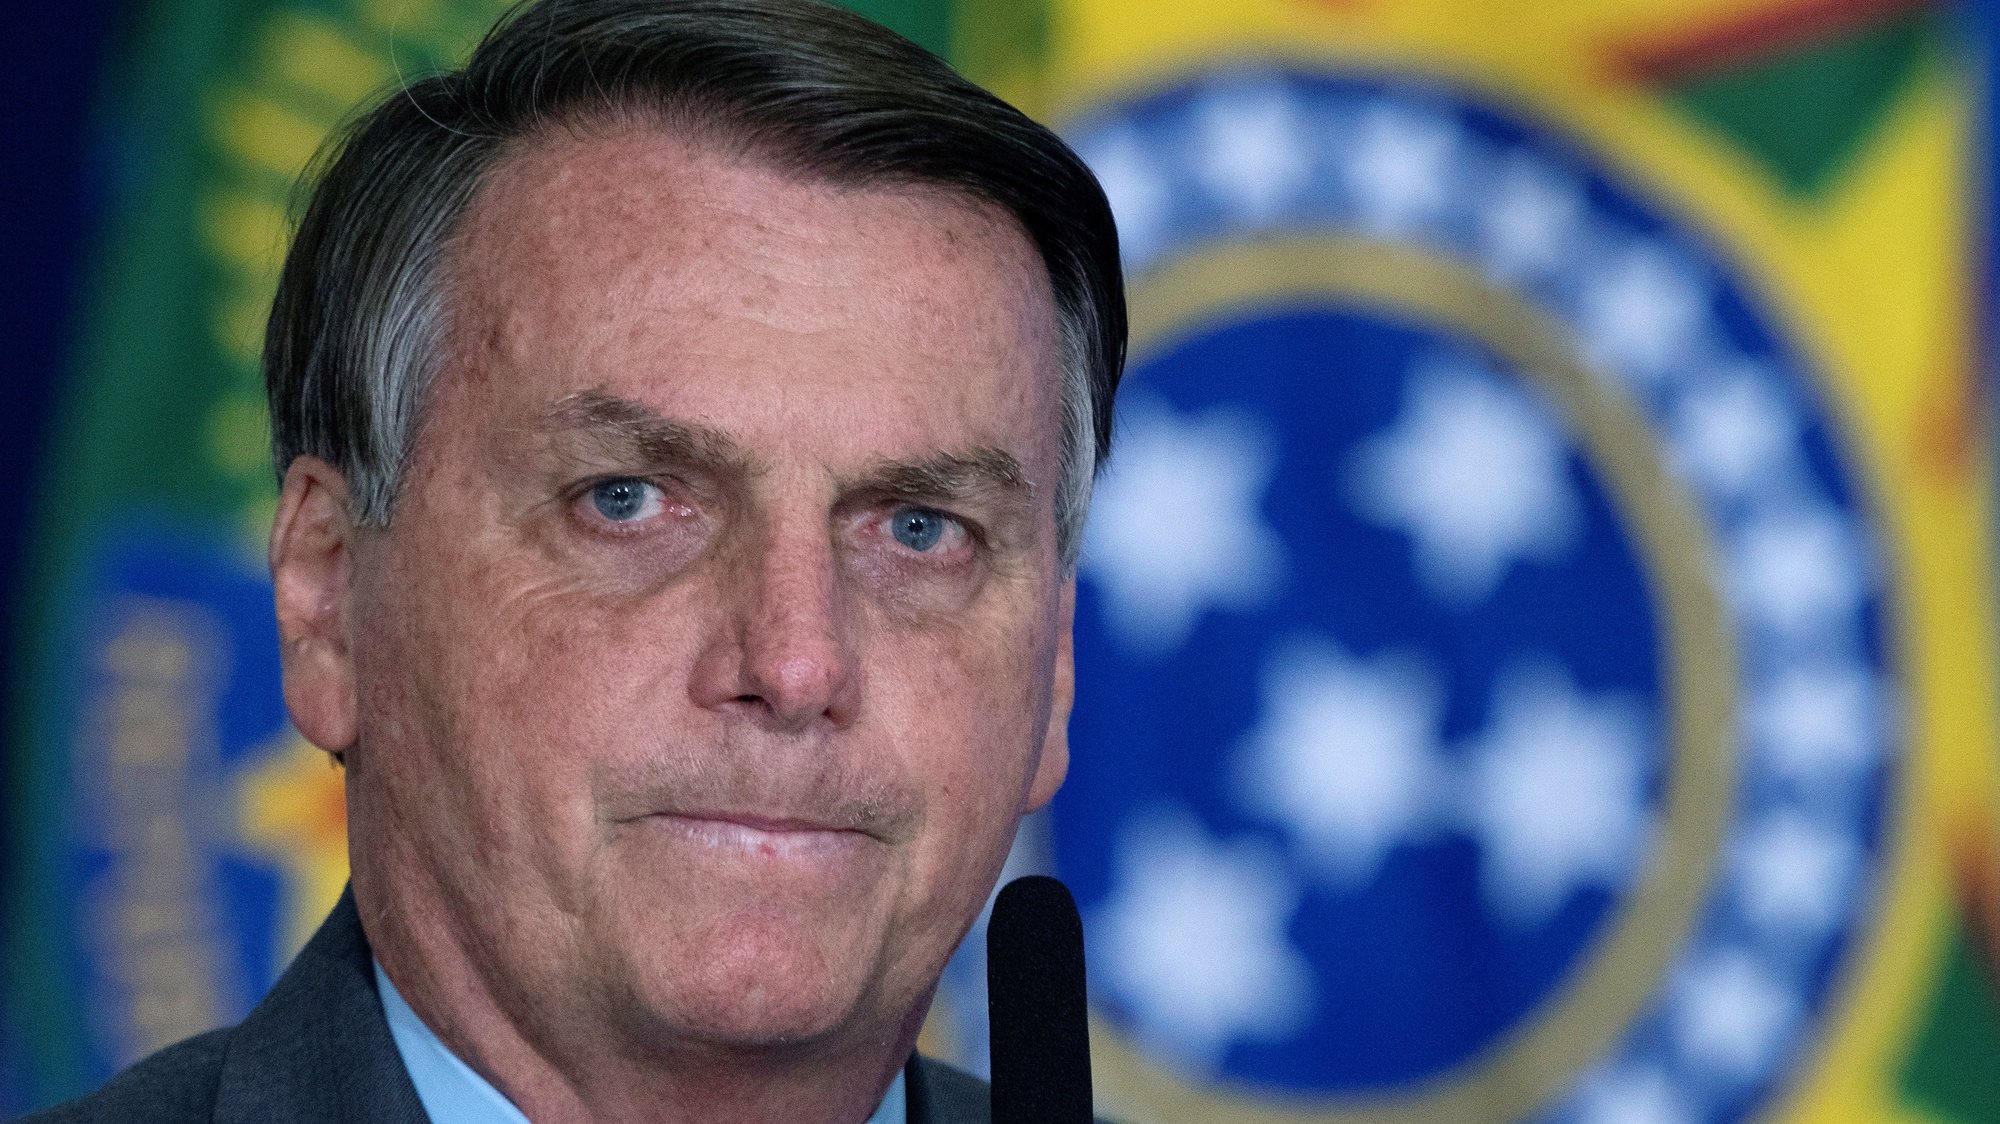 epa09340497 (FILE) - Brazilian President Jair Bolsonaro participates in the launching ceremony of the Los Gigantes de lo Alfalto program, in Brasilia, Brazil, 18 May 2021 (reissued 12 July 2021). Brazilian Federal Police on 12 July 2021 opened an investigation against Brazilian President Bolsonaro for breach of duty over the purchase of Covaxin.  EPA/Joedson Alves *** Local Caption *** 56905212